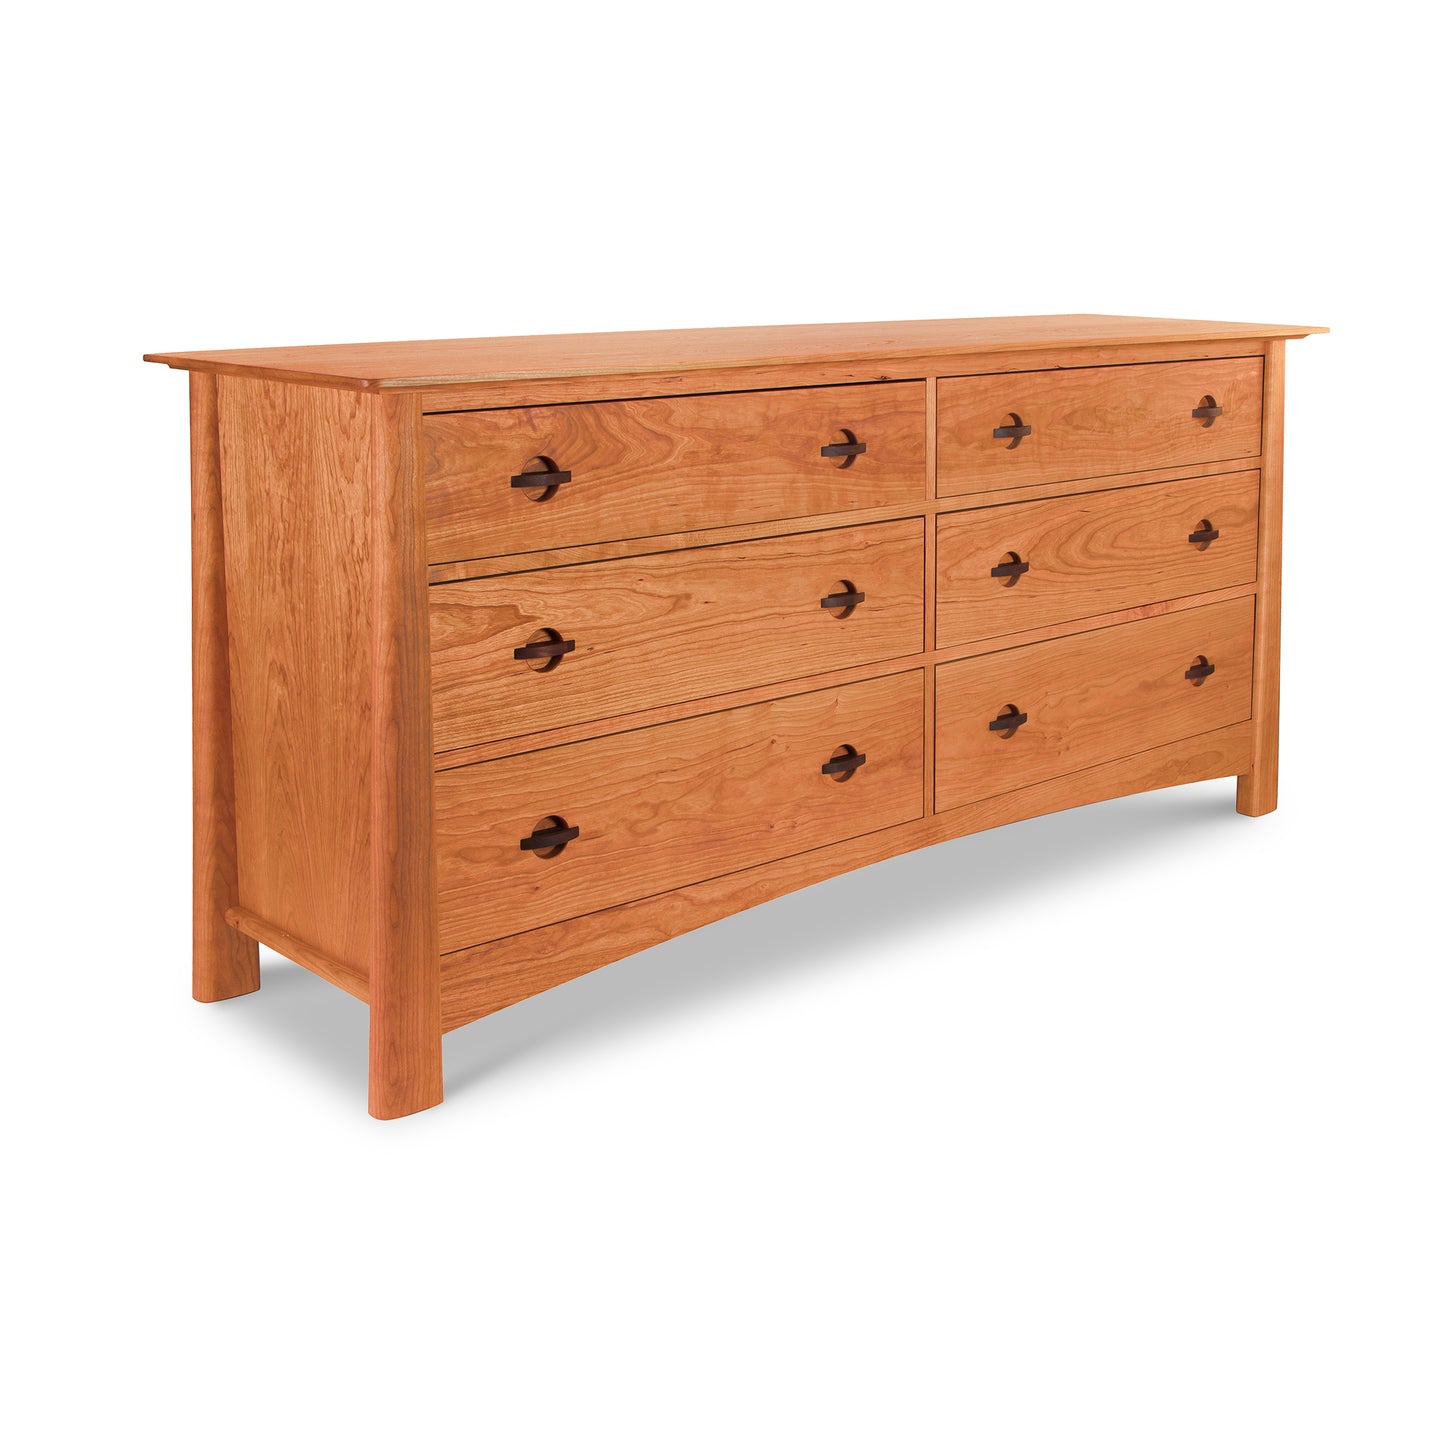 A Cherry Moon 6-Drawer Dresser from Maple Corner Woodworks with black metal handles, set against a white background. The dresser features a smooth top and a curved front.